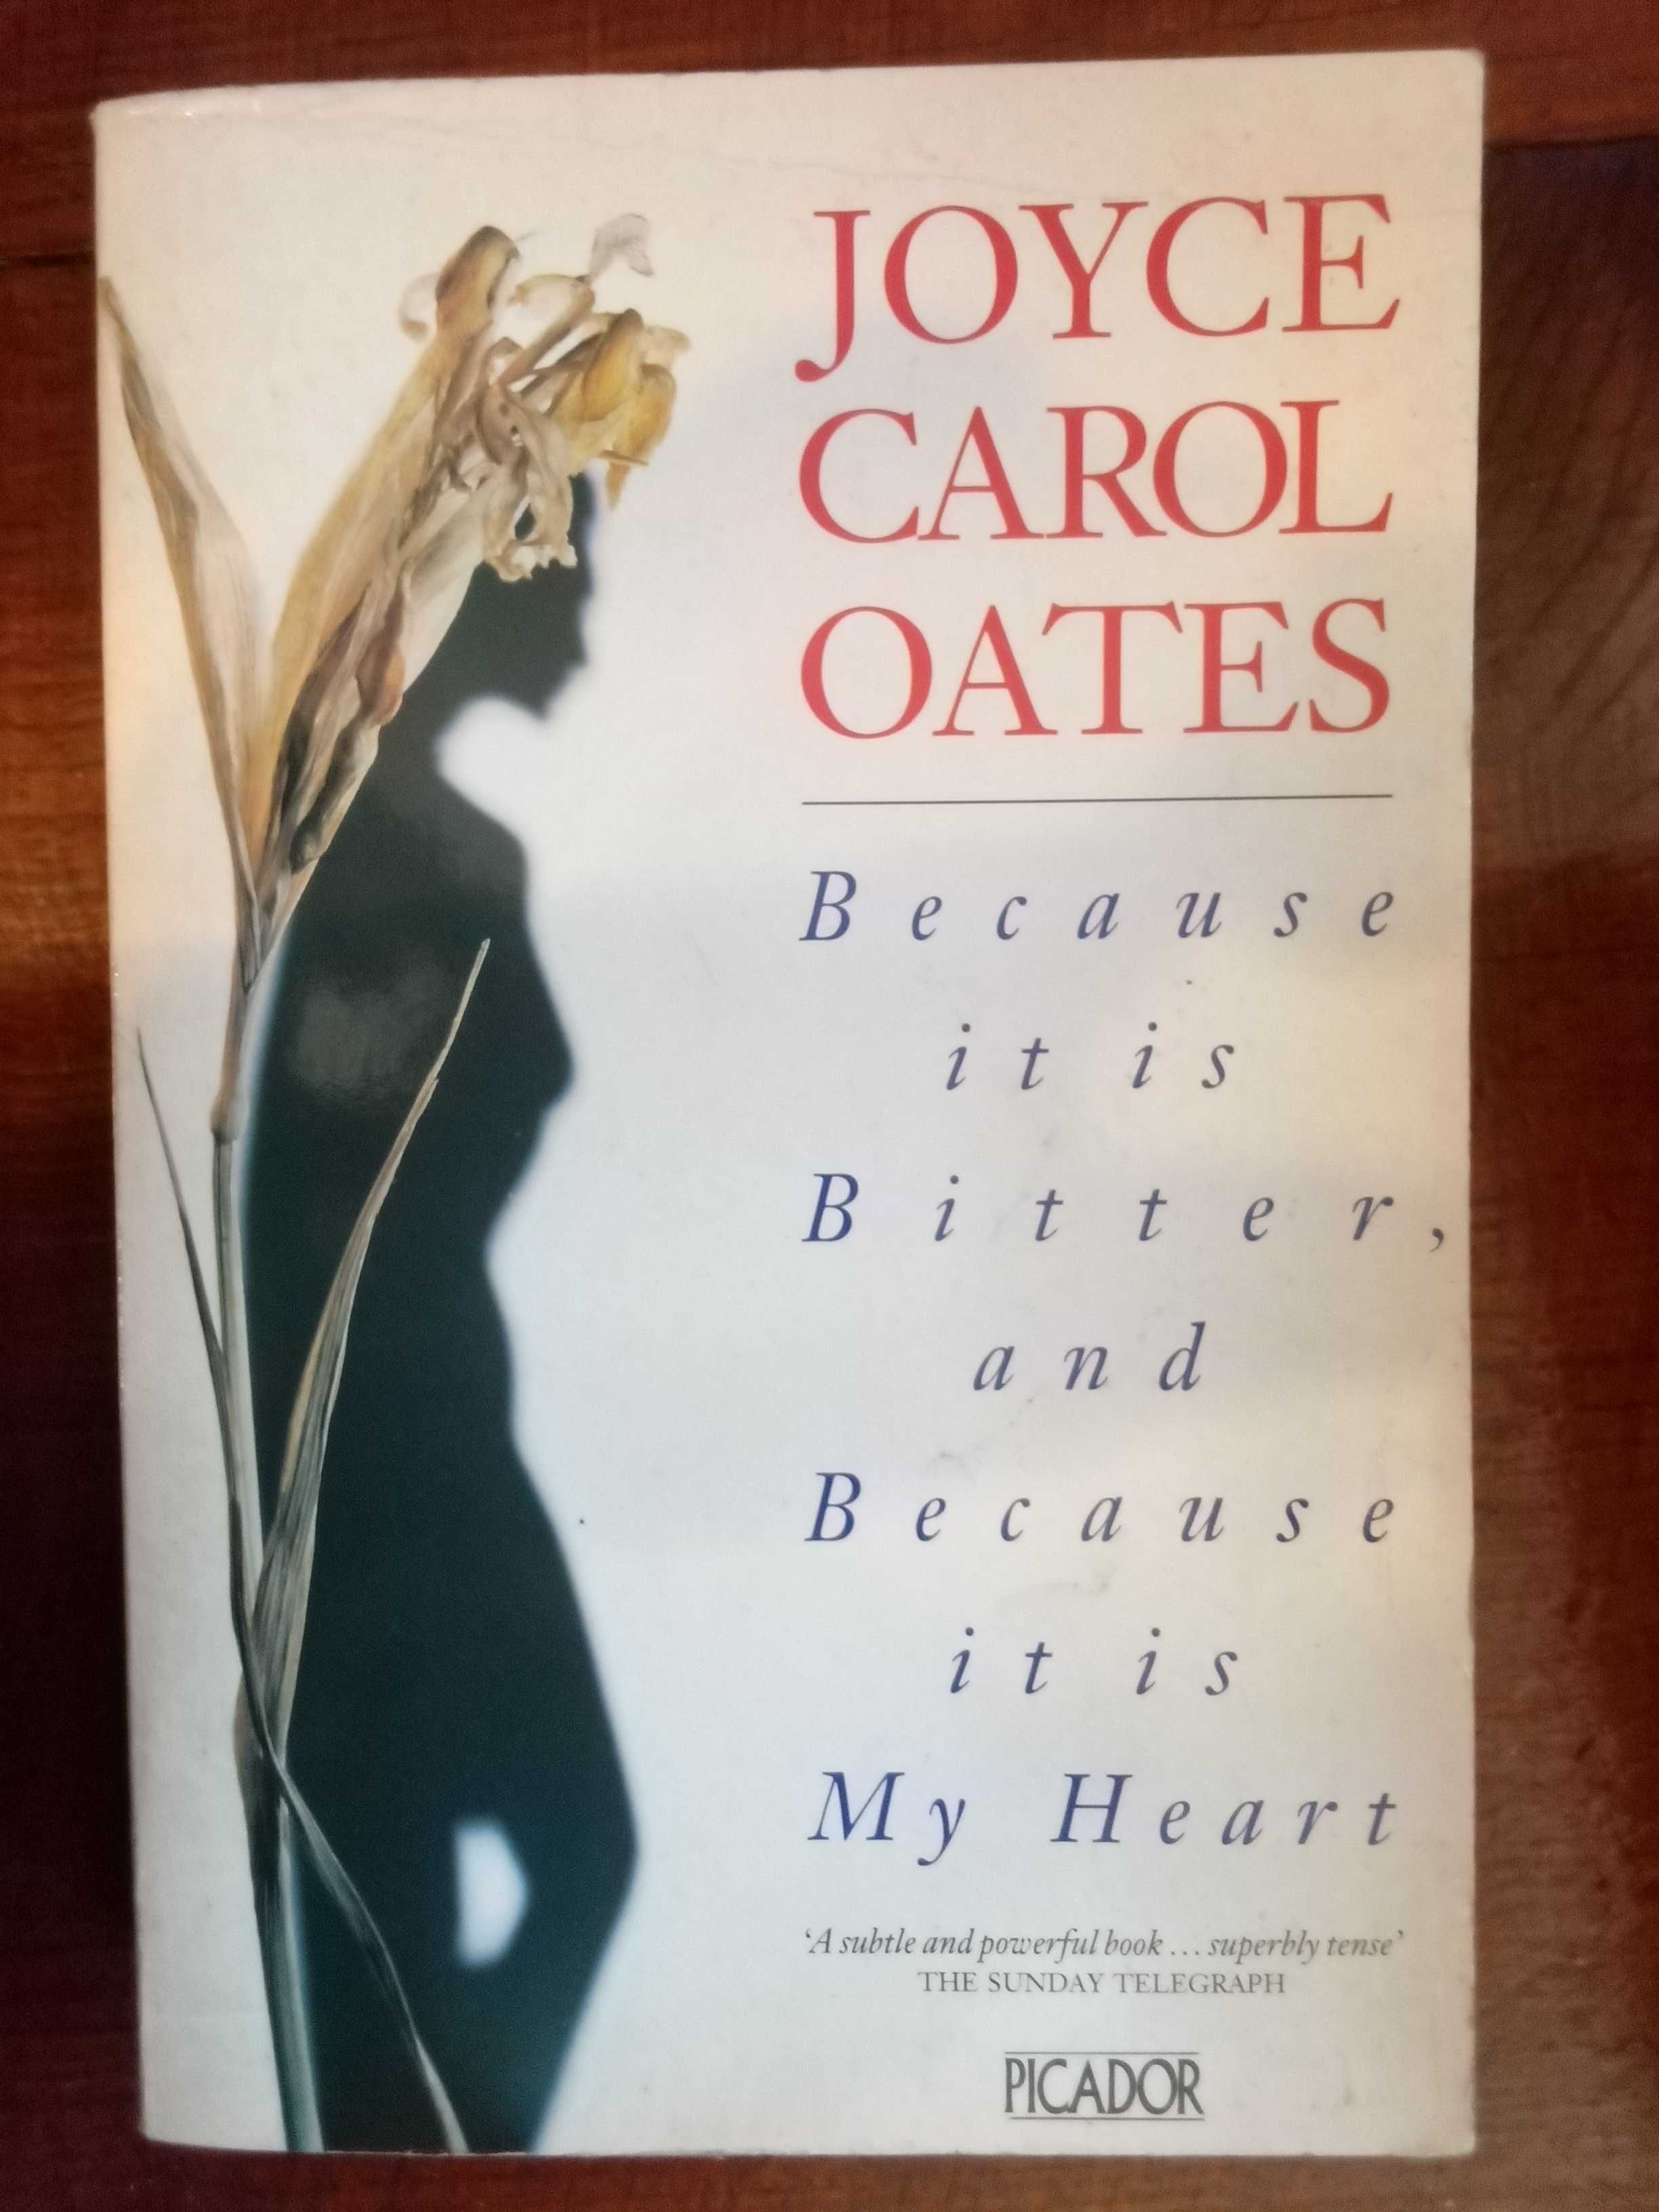 Joyce Carol Oates - Because it is bitter, and because it is my heart